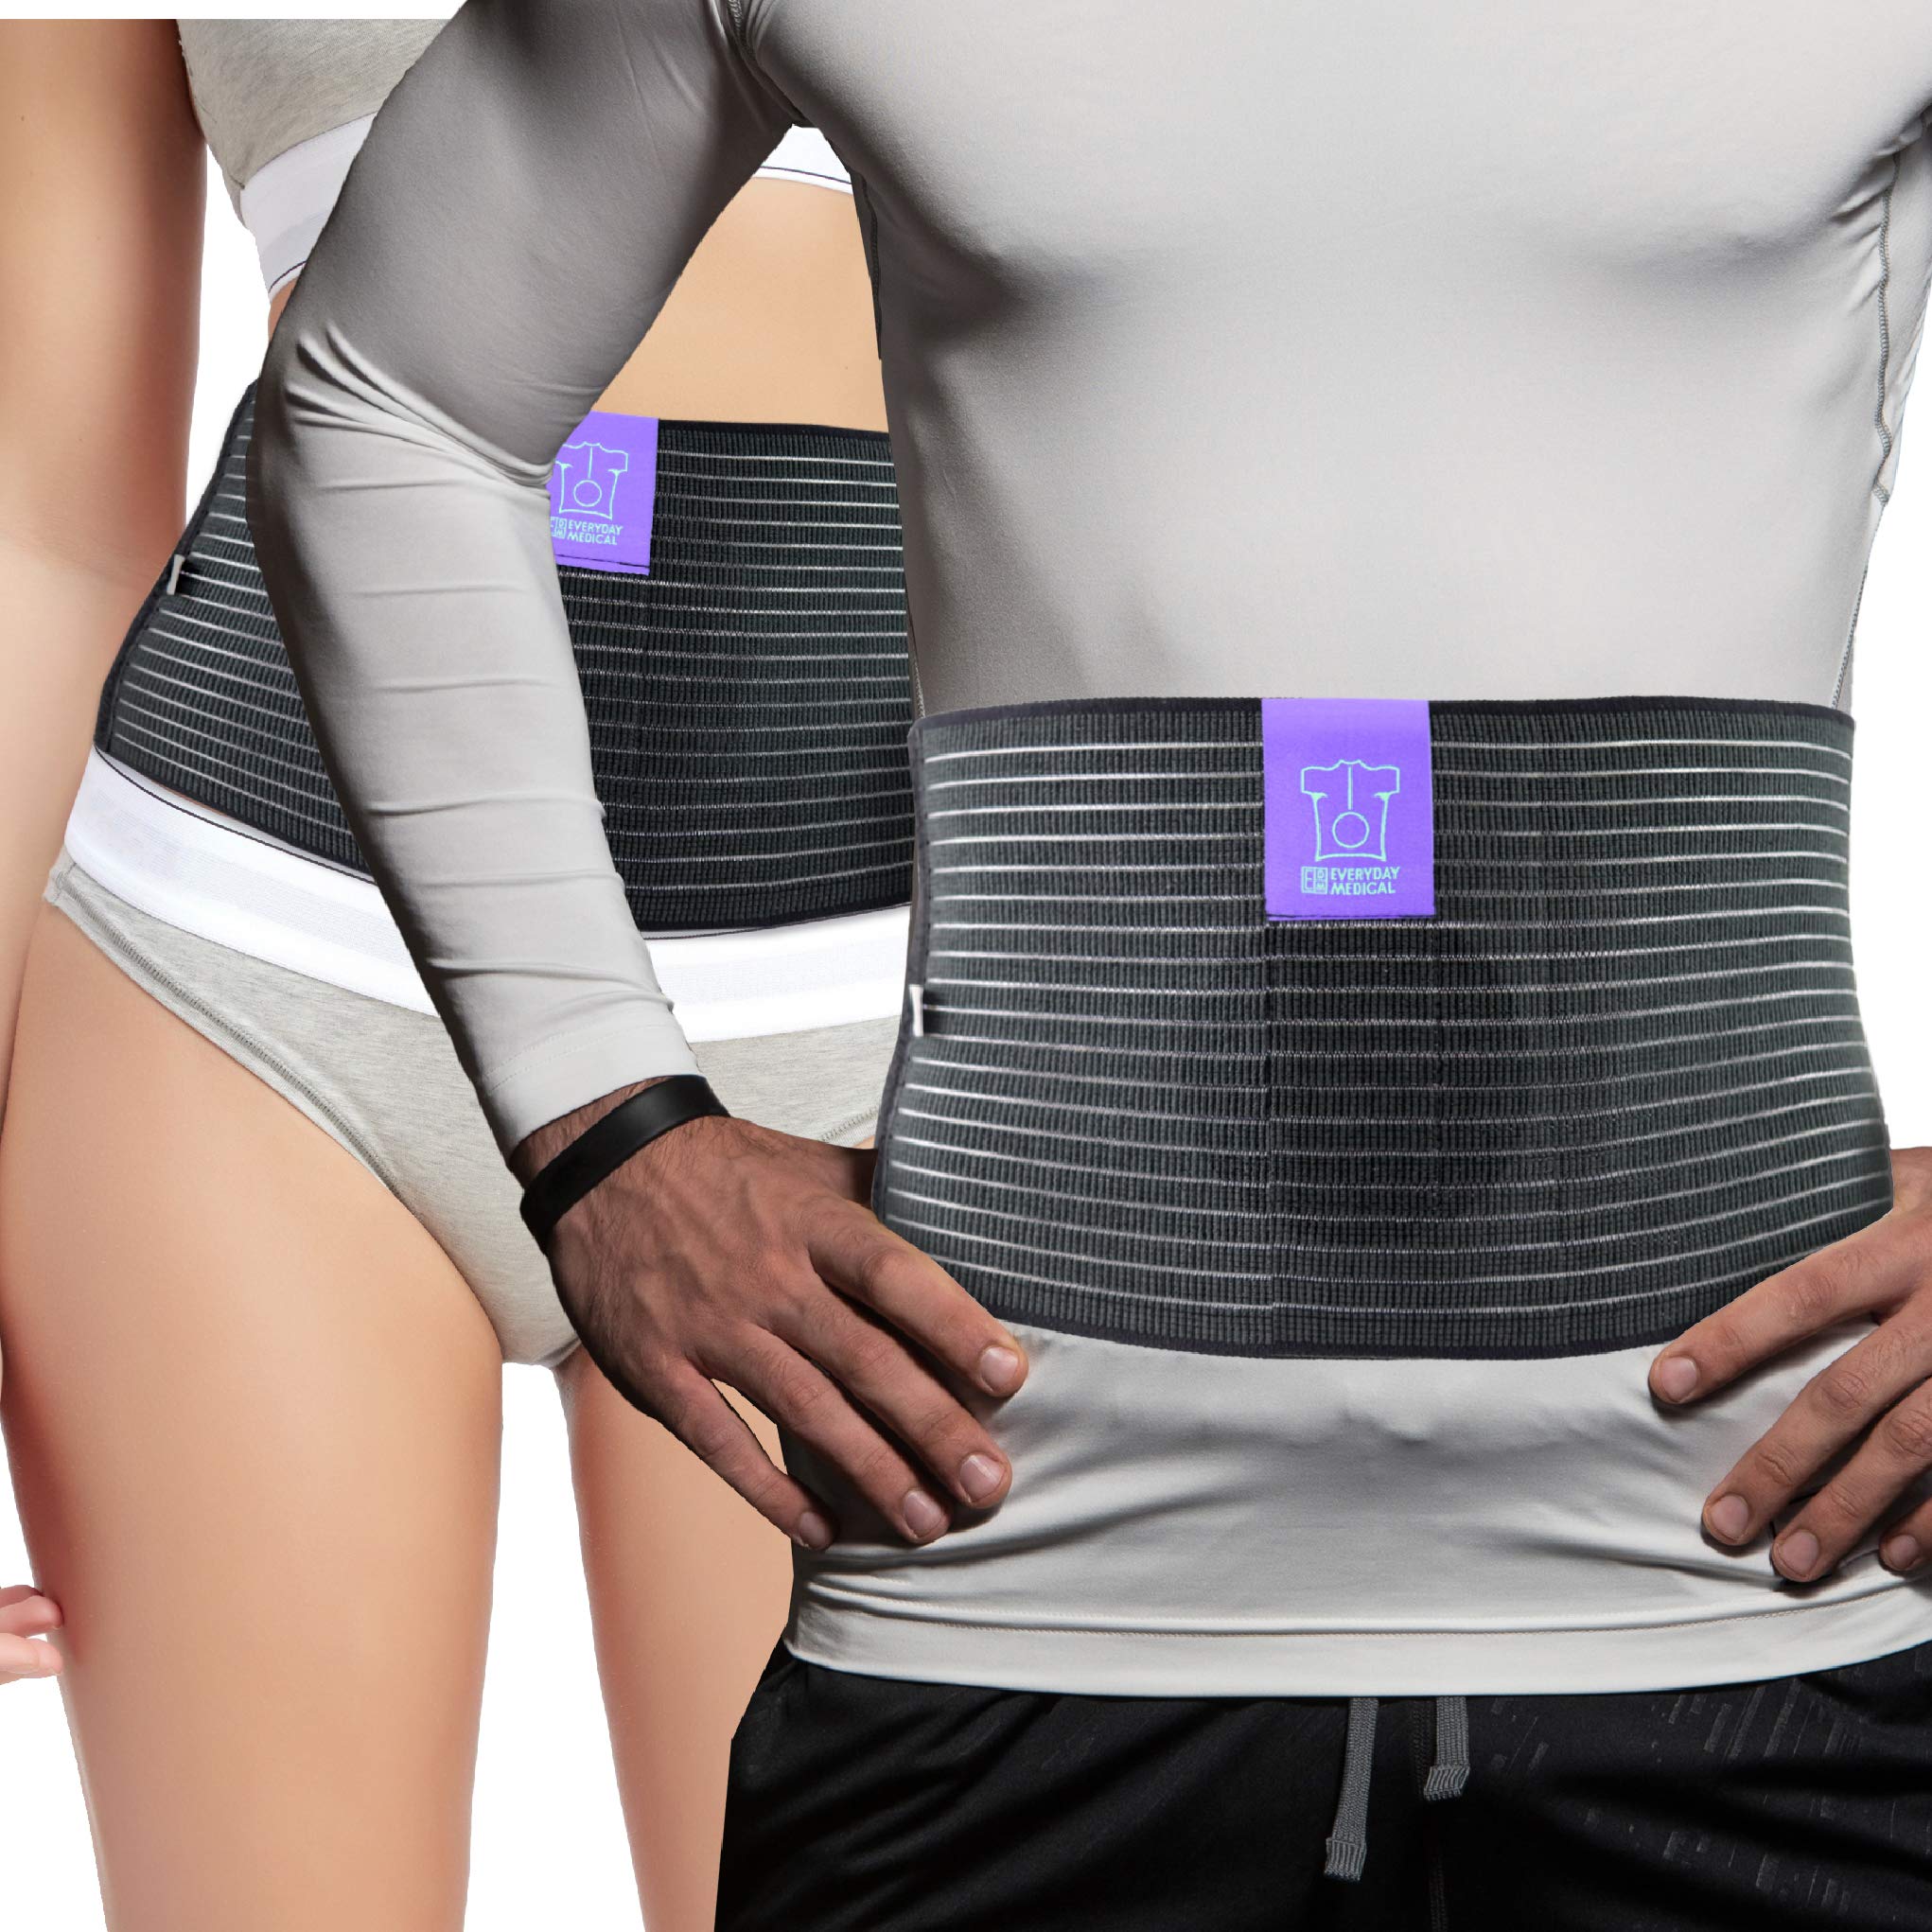 Armor Adult Umbilical Hernia Truss Support Belt for Relief of